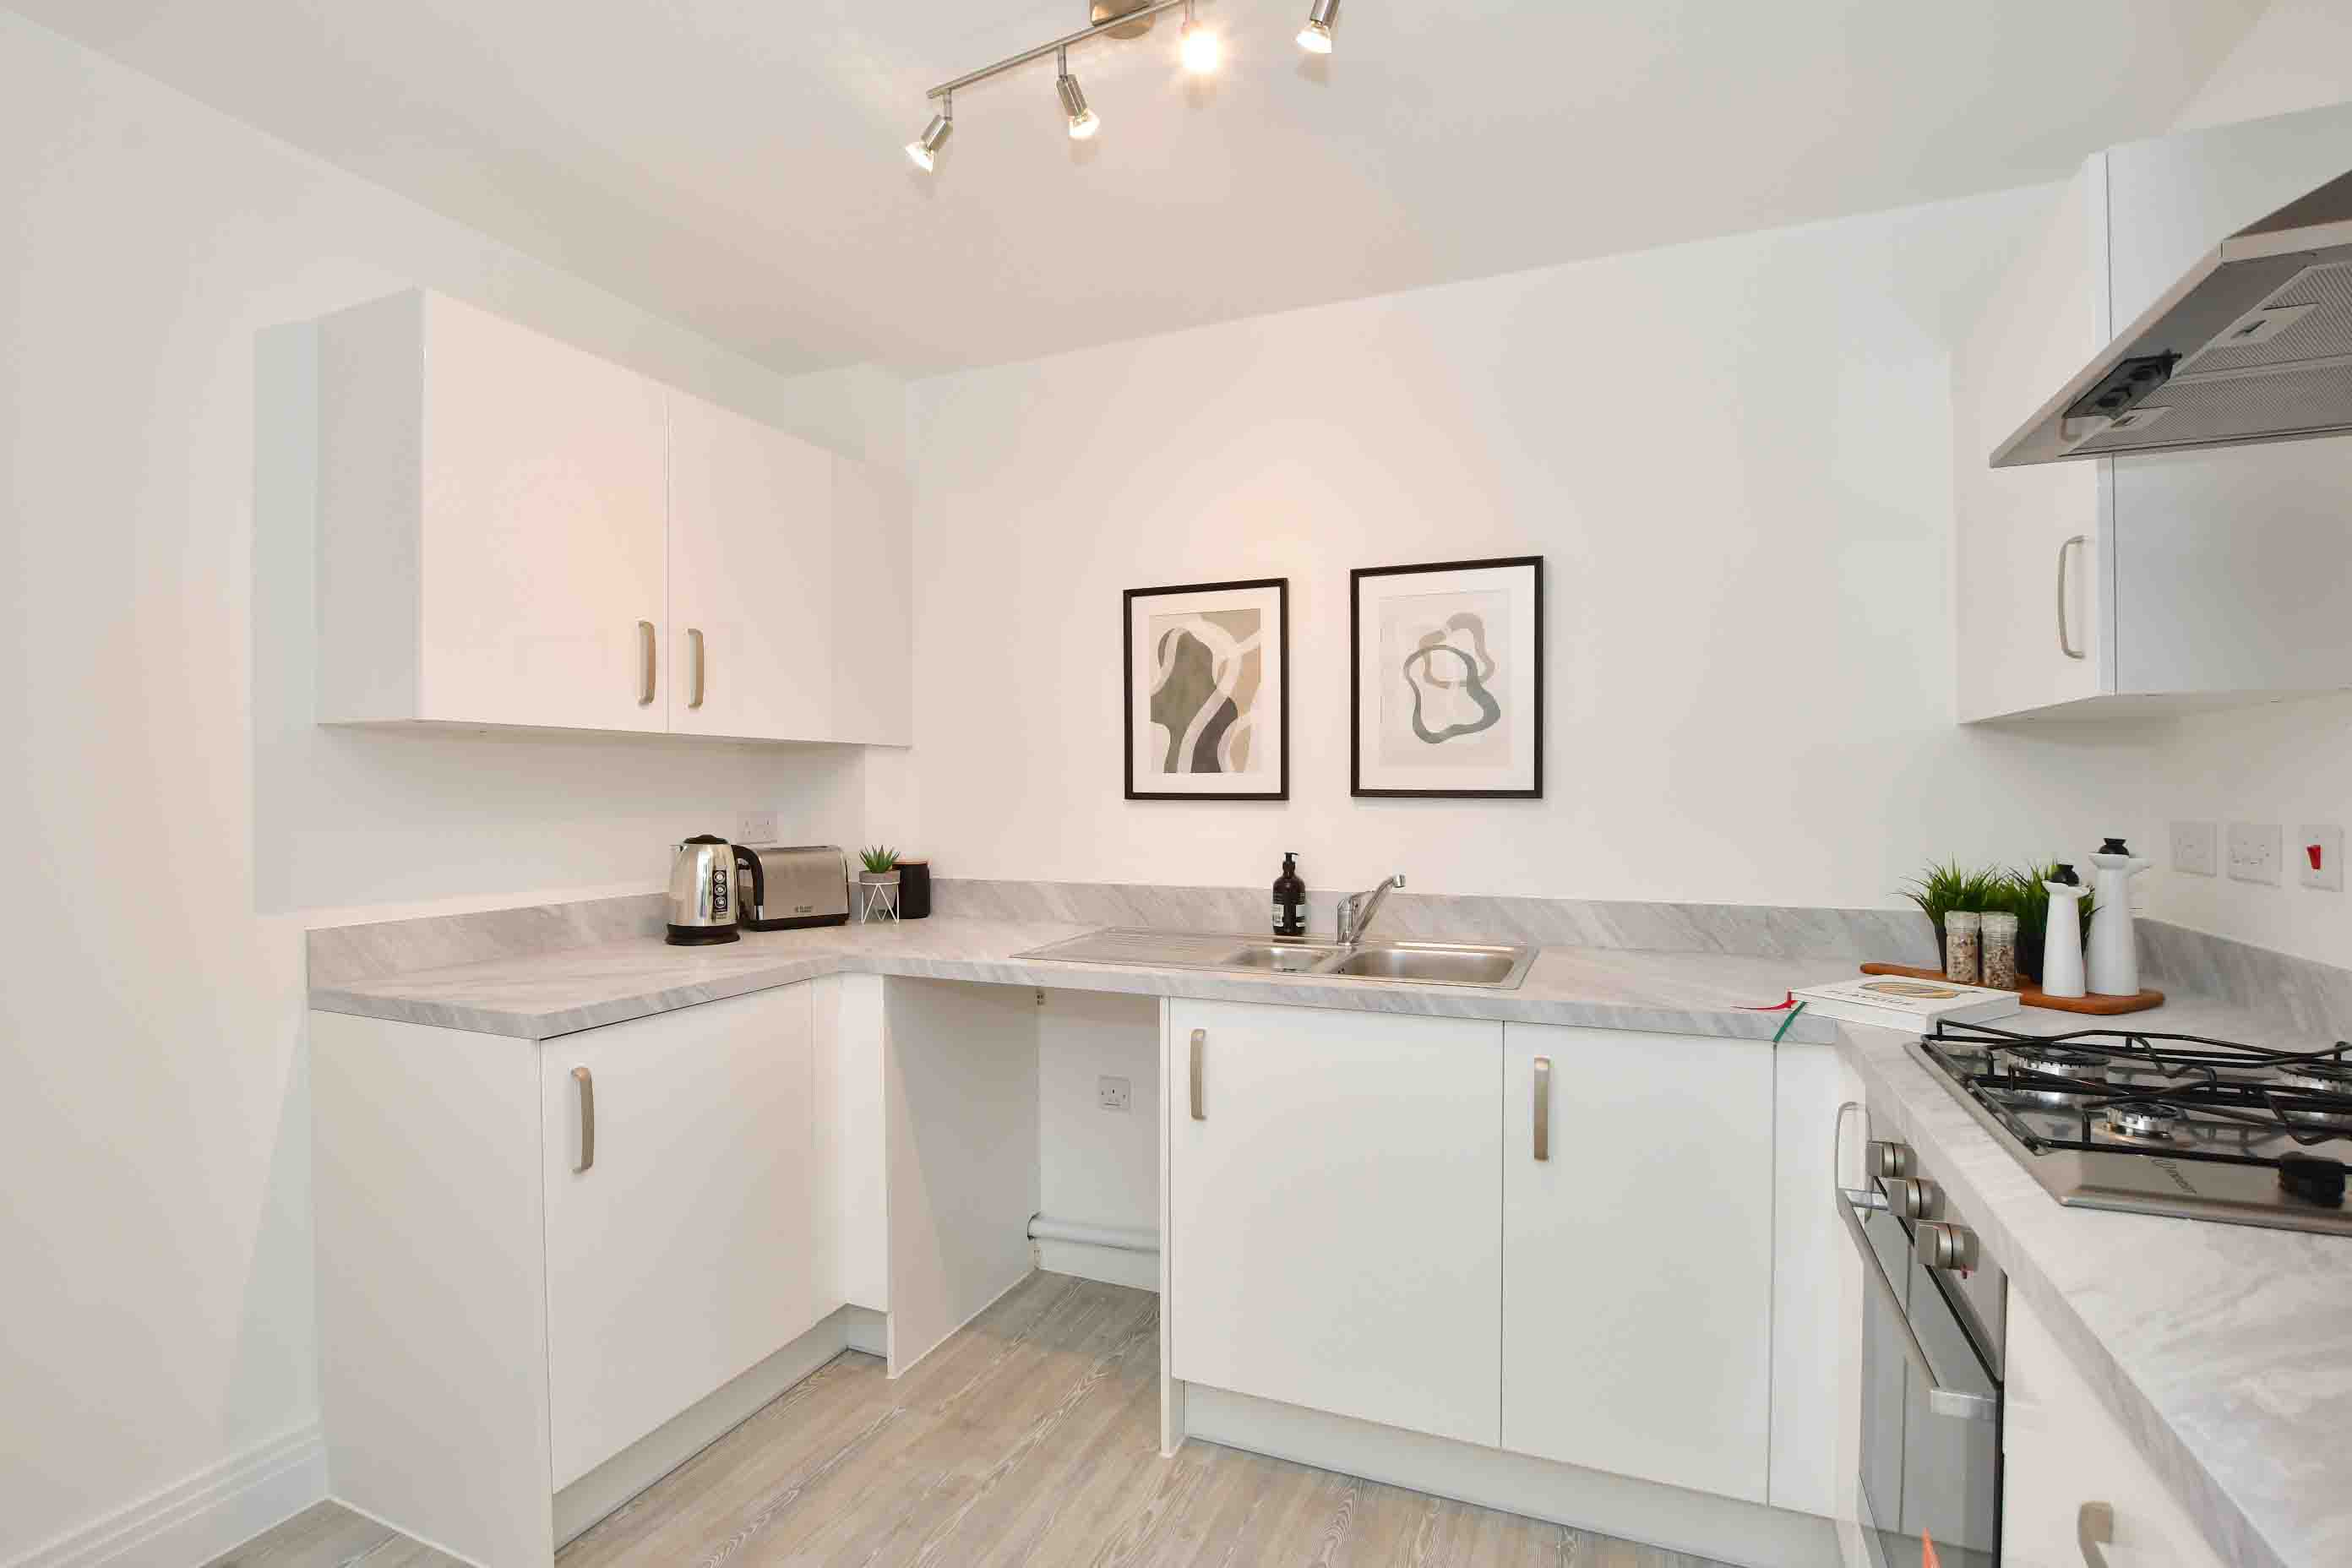 Kitchen at Kings Barton Shared Ownership apartment in Winchester